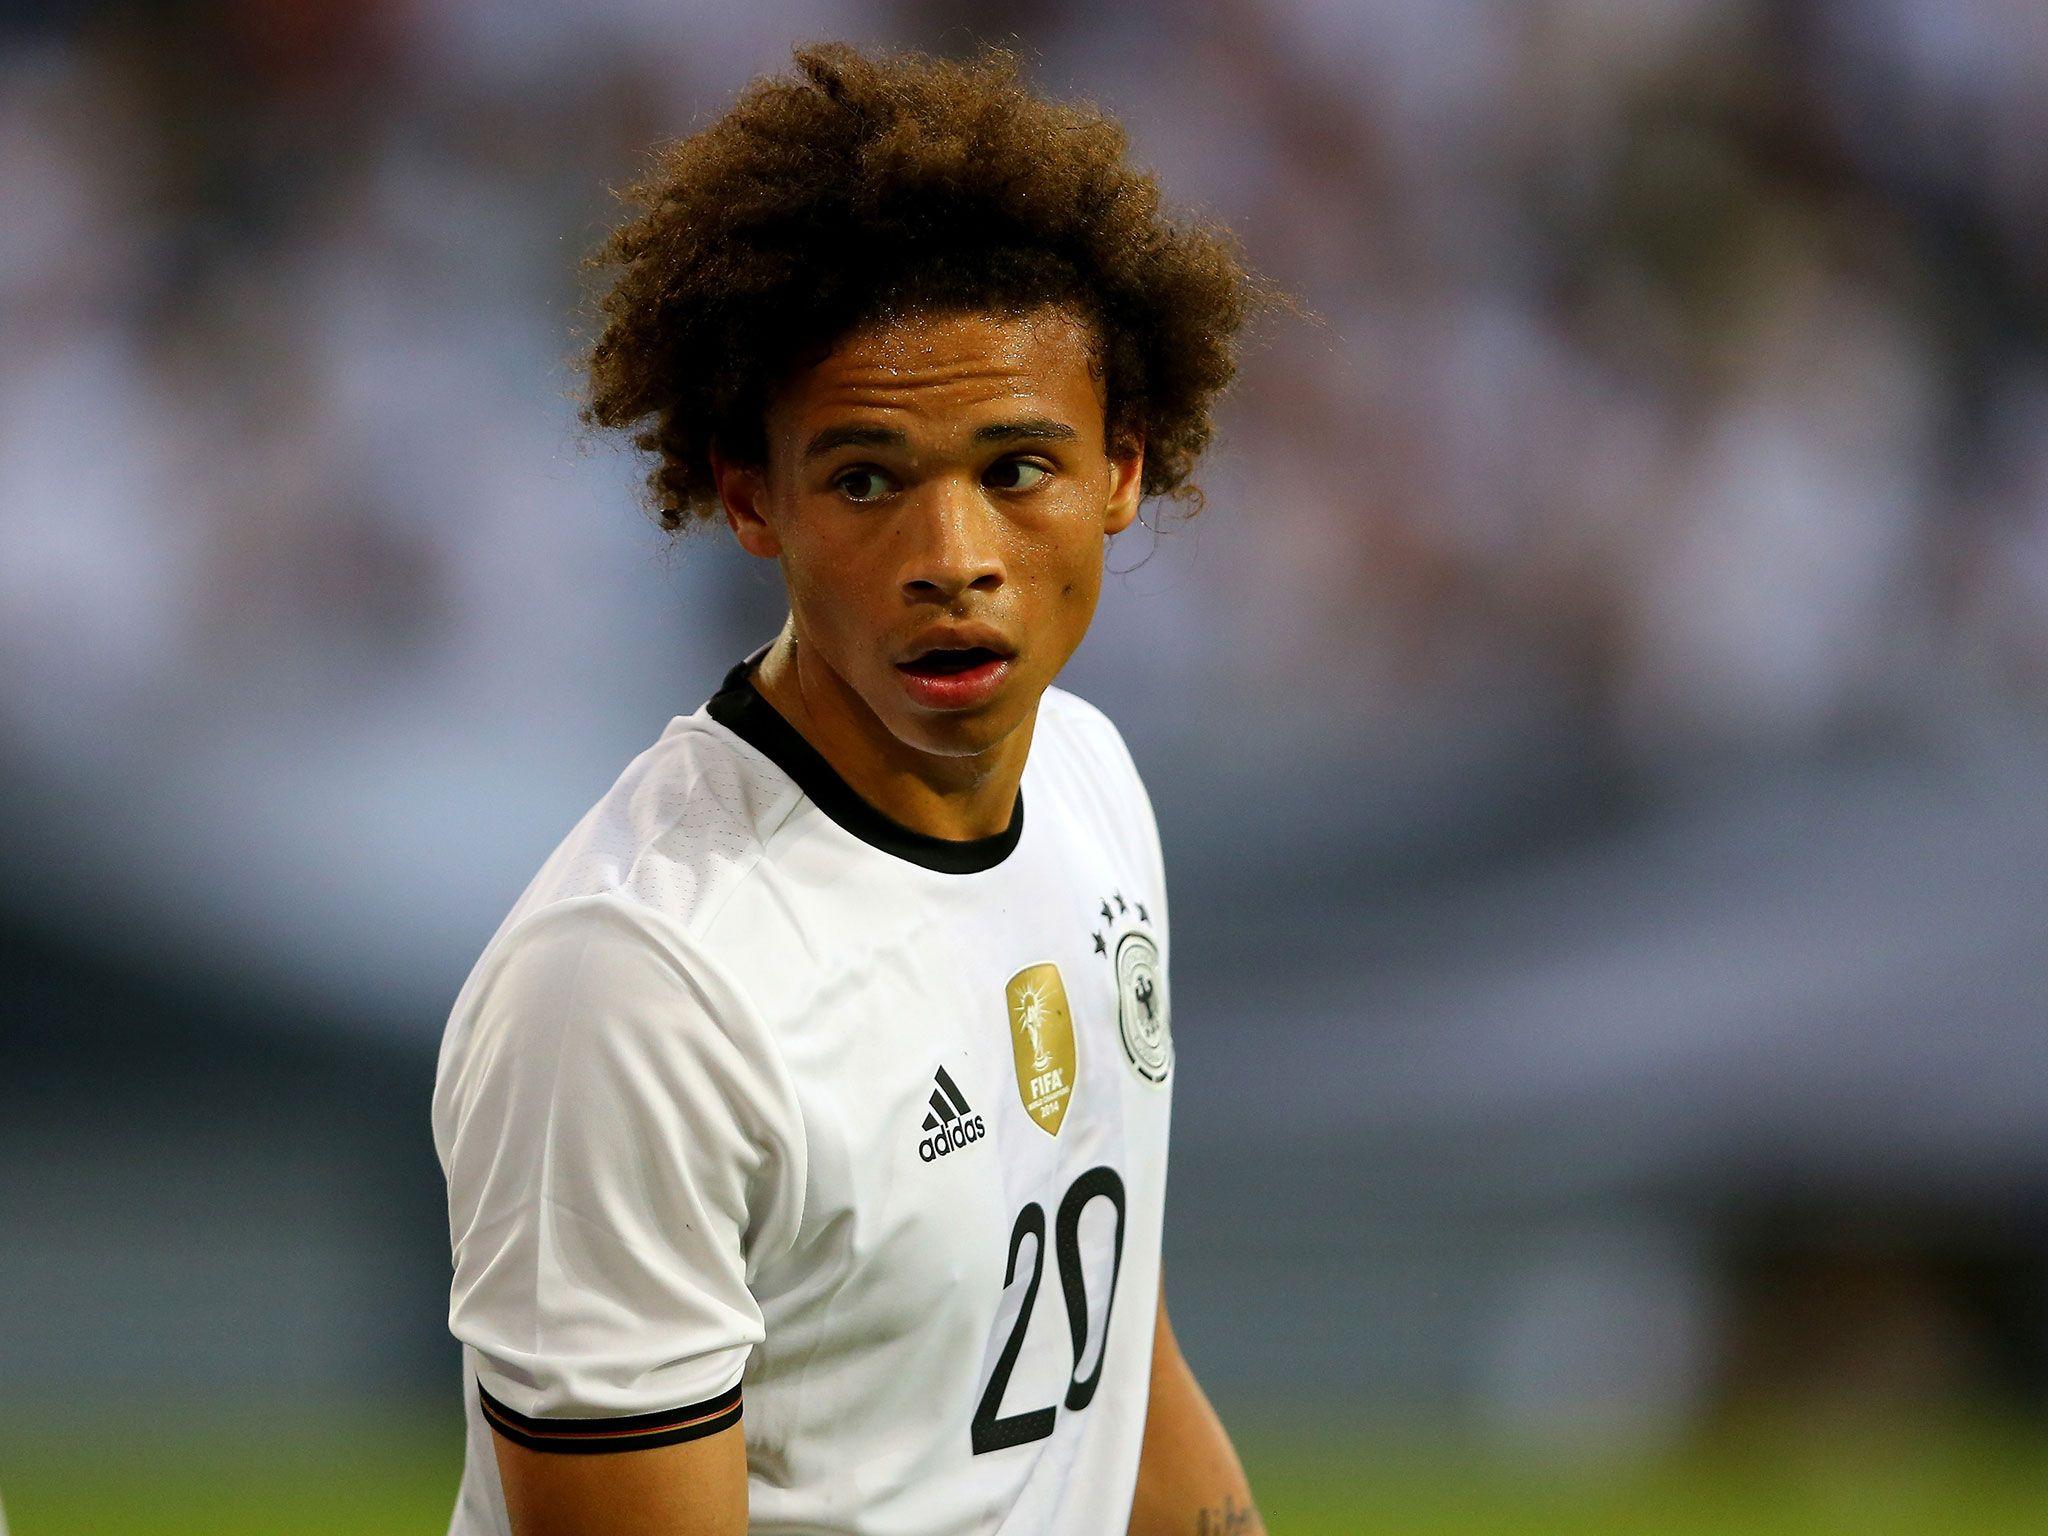 Leroy Sane to Manchester City: Germany international completes